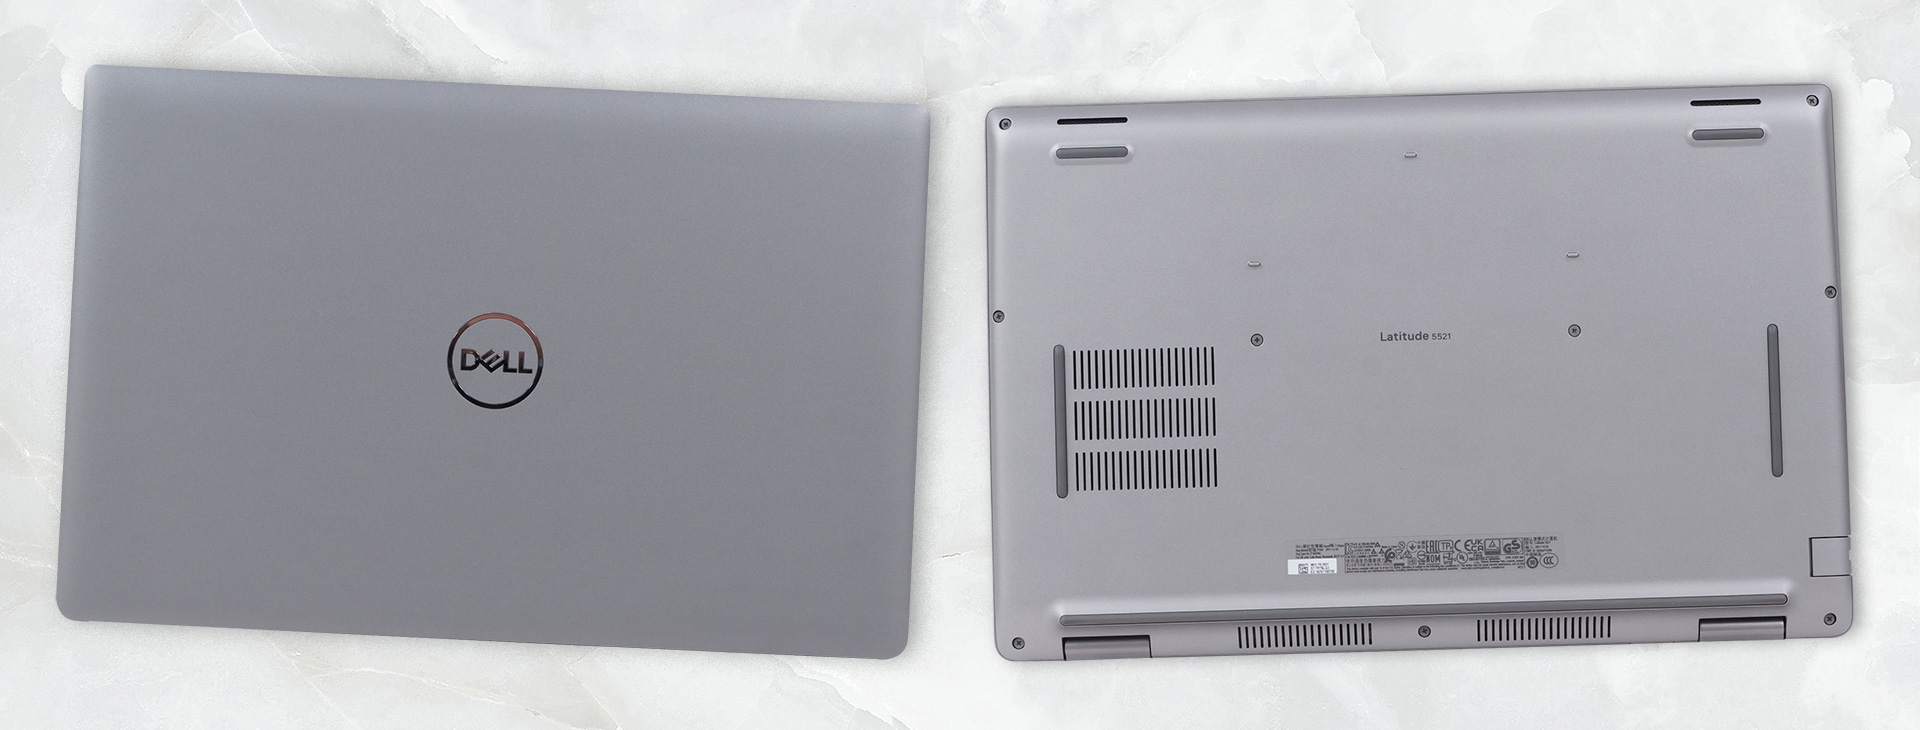 Dell Latitude 15 5521 review - boring but quite powerful